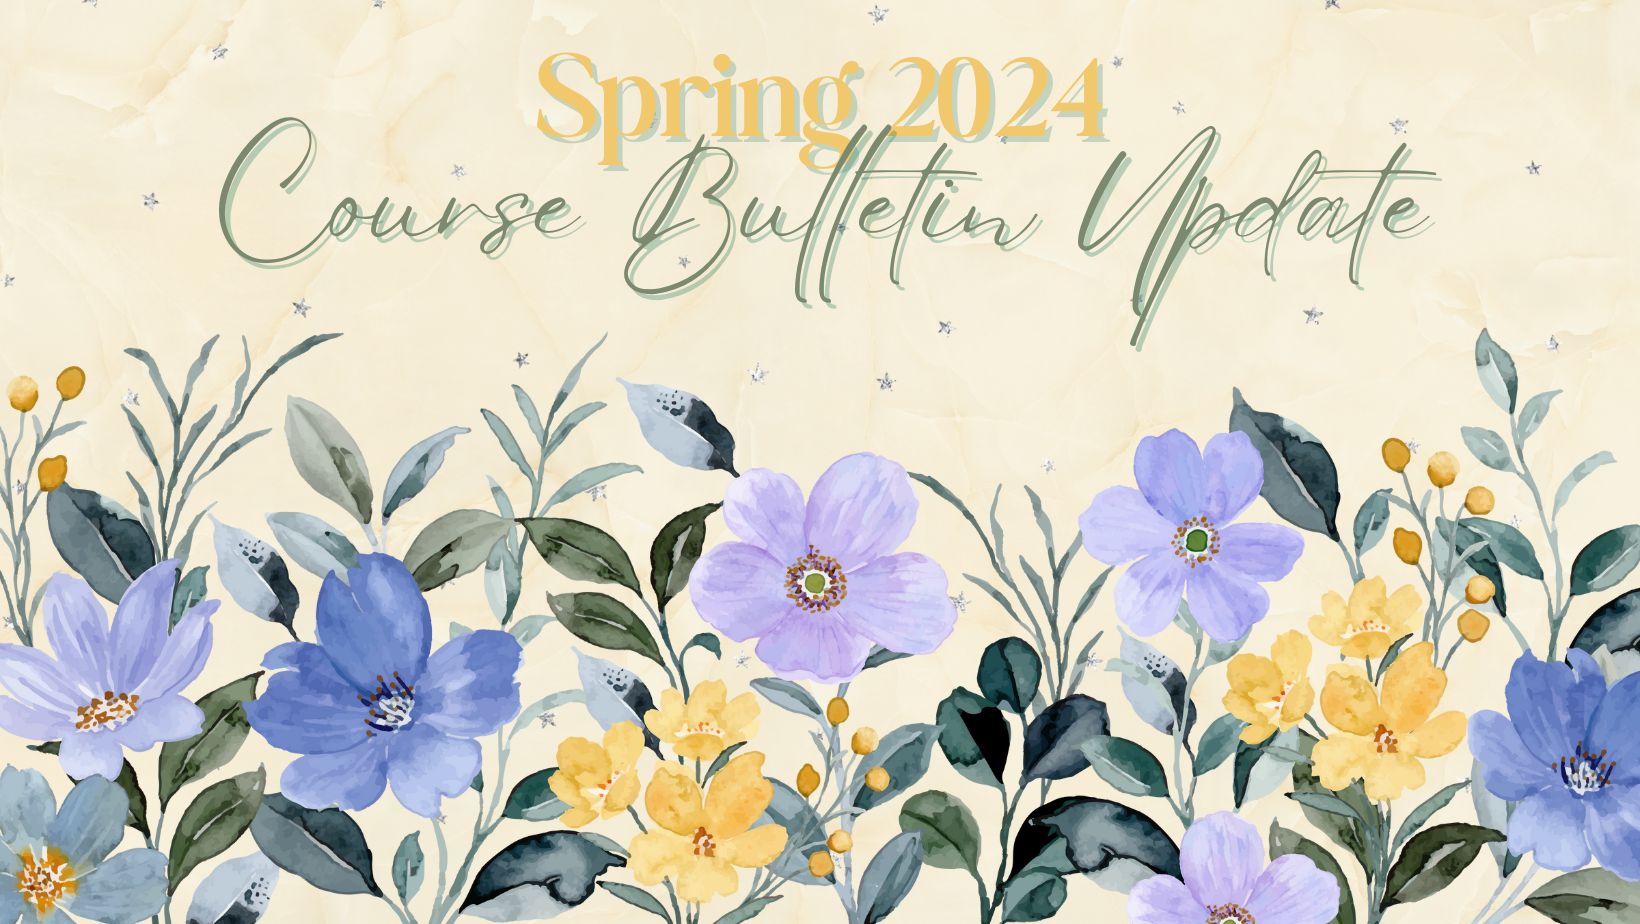 Spring 2024 Course Bulletin Update